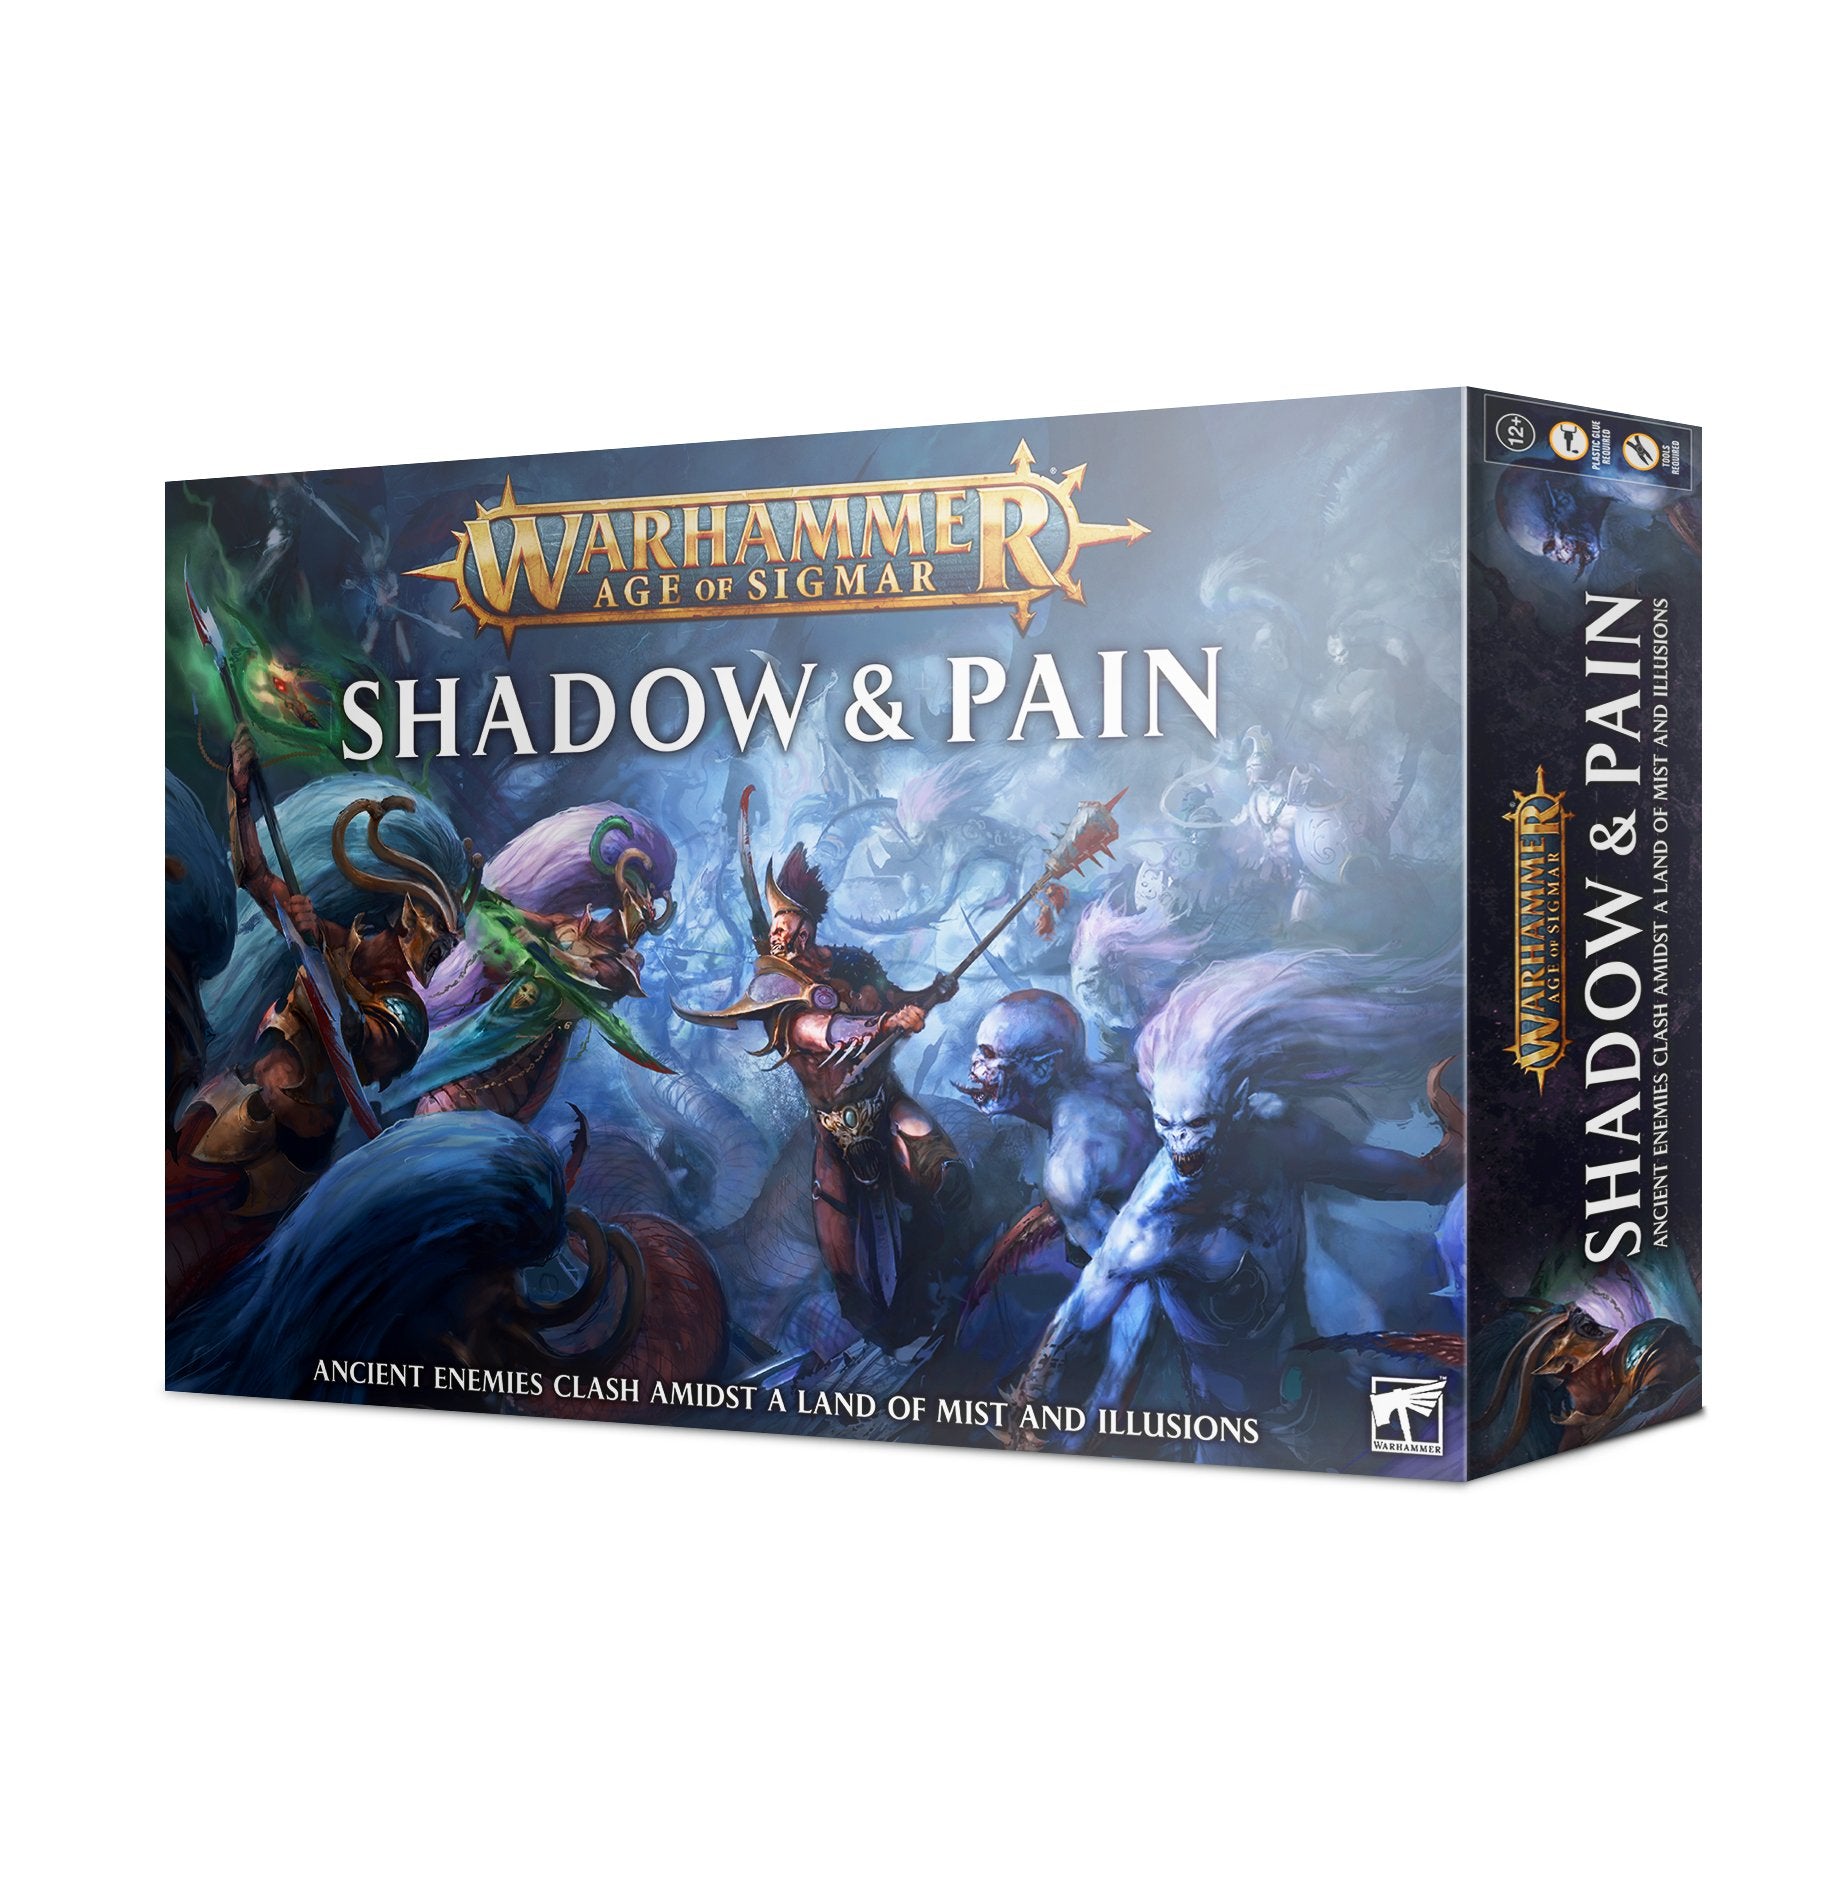 Warhammer Age of Sigmar: Shadow and Pain